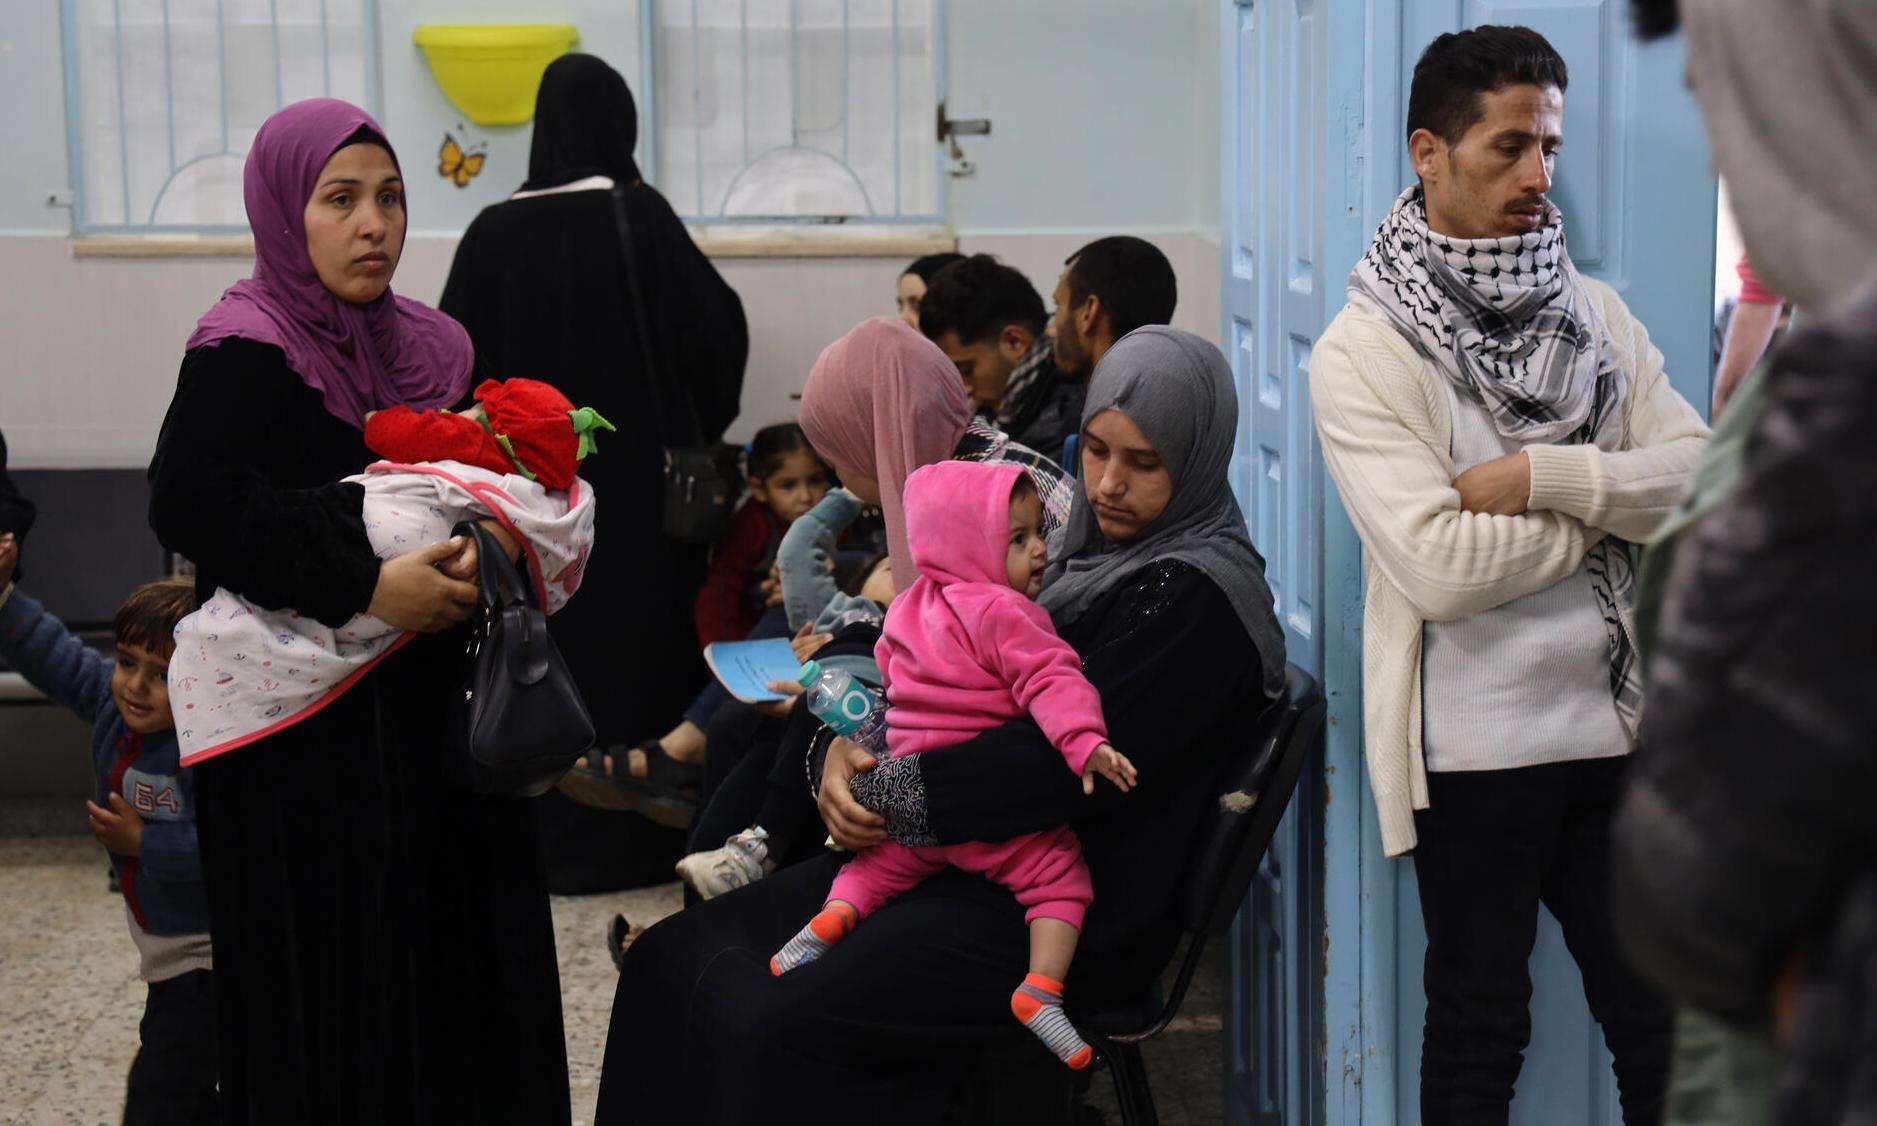 Patients wait for care inside the Al-Shaboura clinic in Rafah, Gaza.